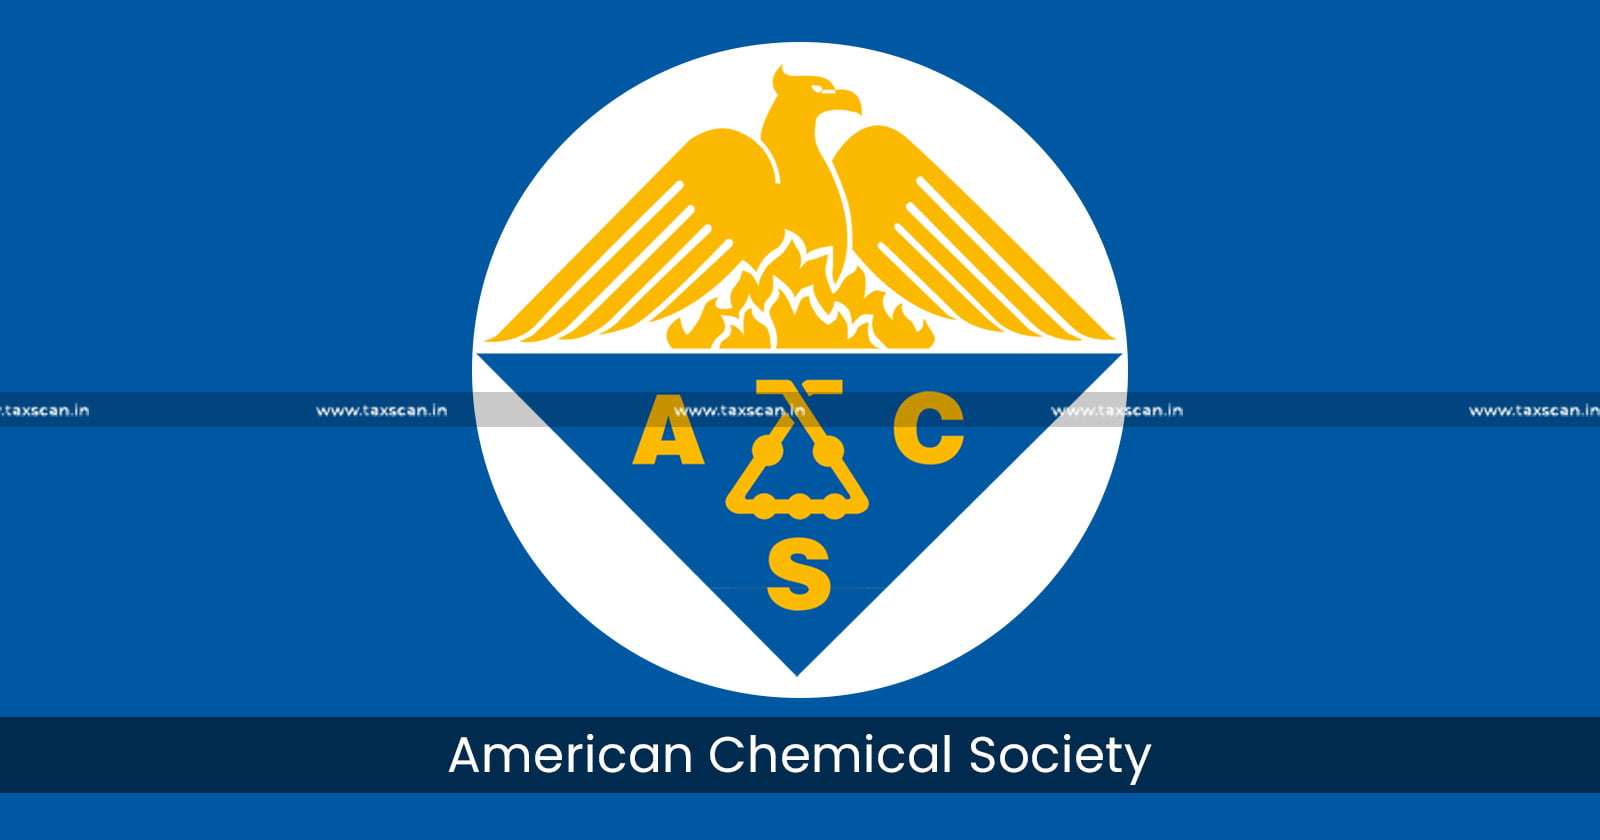 Subscription Fee - American Chemical Society - Indian Customers - Customers - Royalty - Indo-US Treaty - ITAT - Taxscan